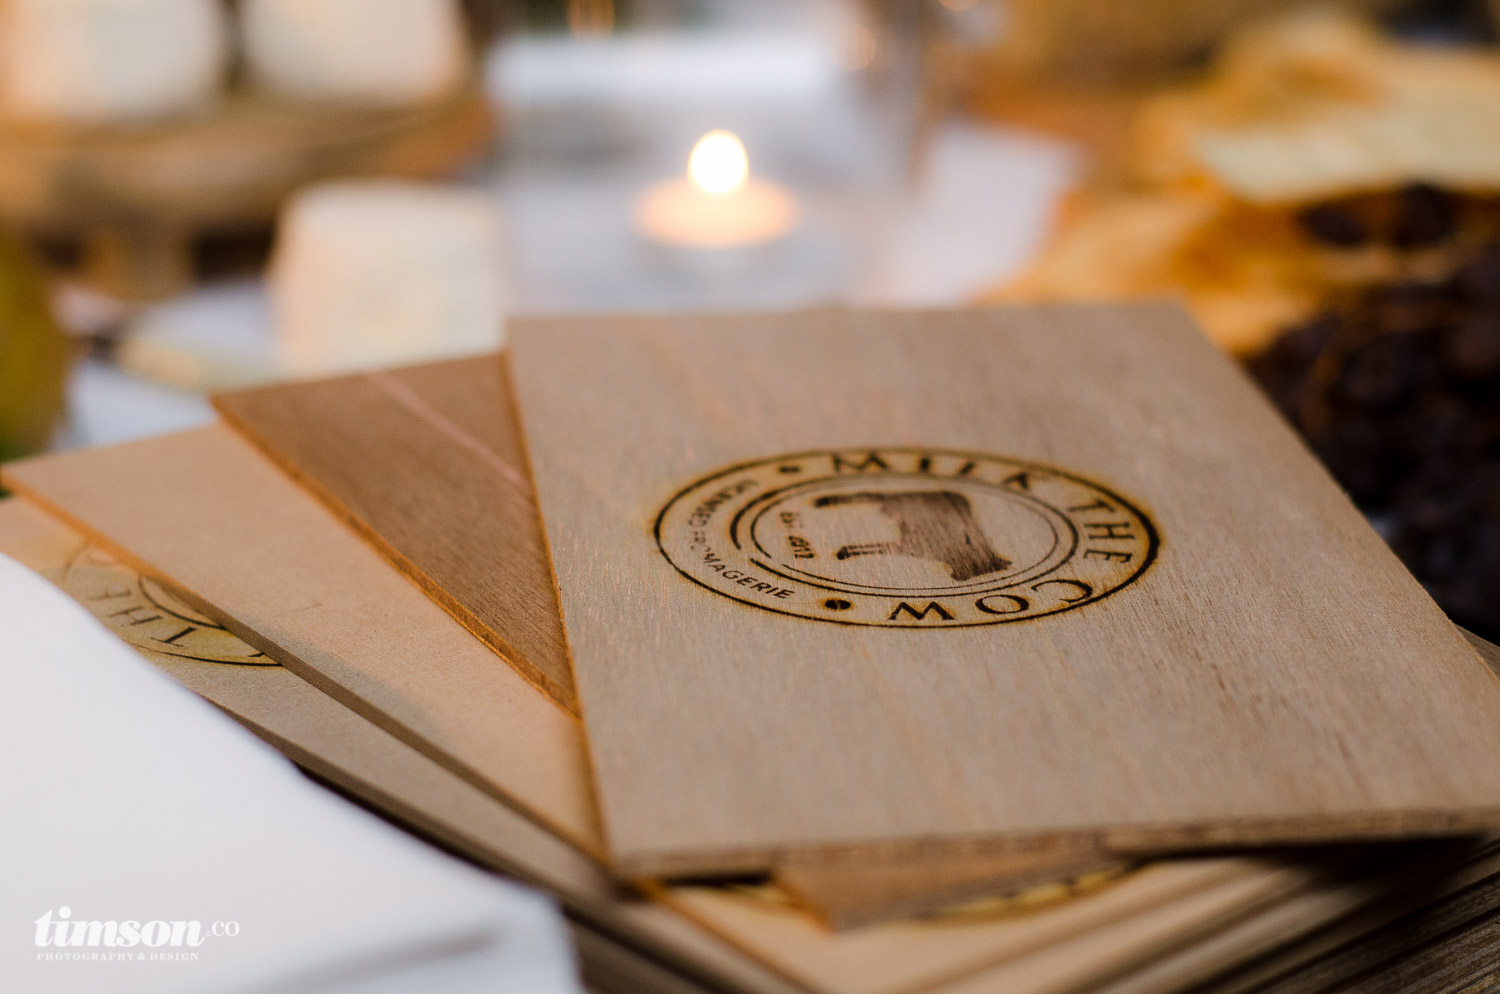 Branded wooden cheeseboards from Milk the Cow